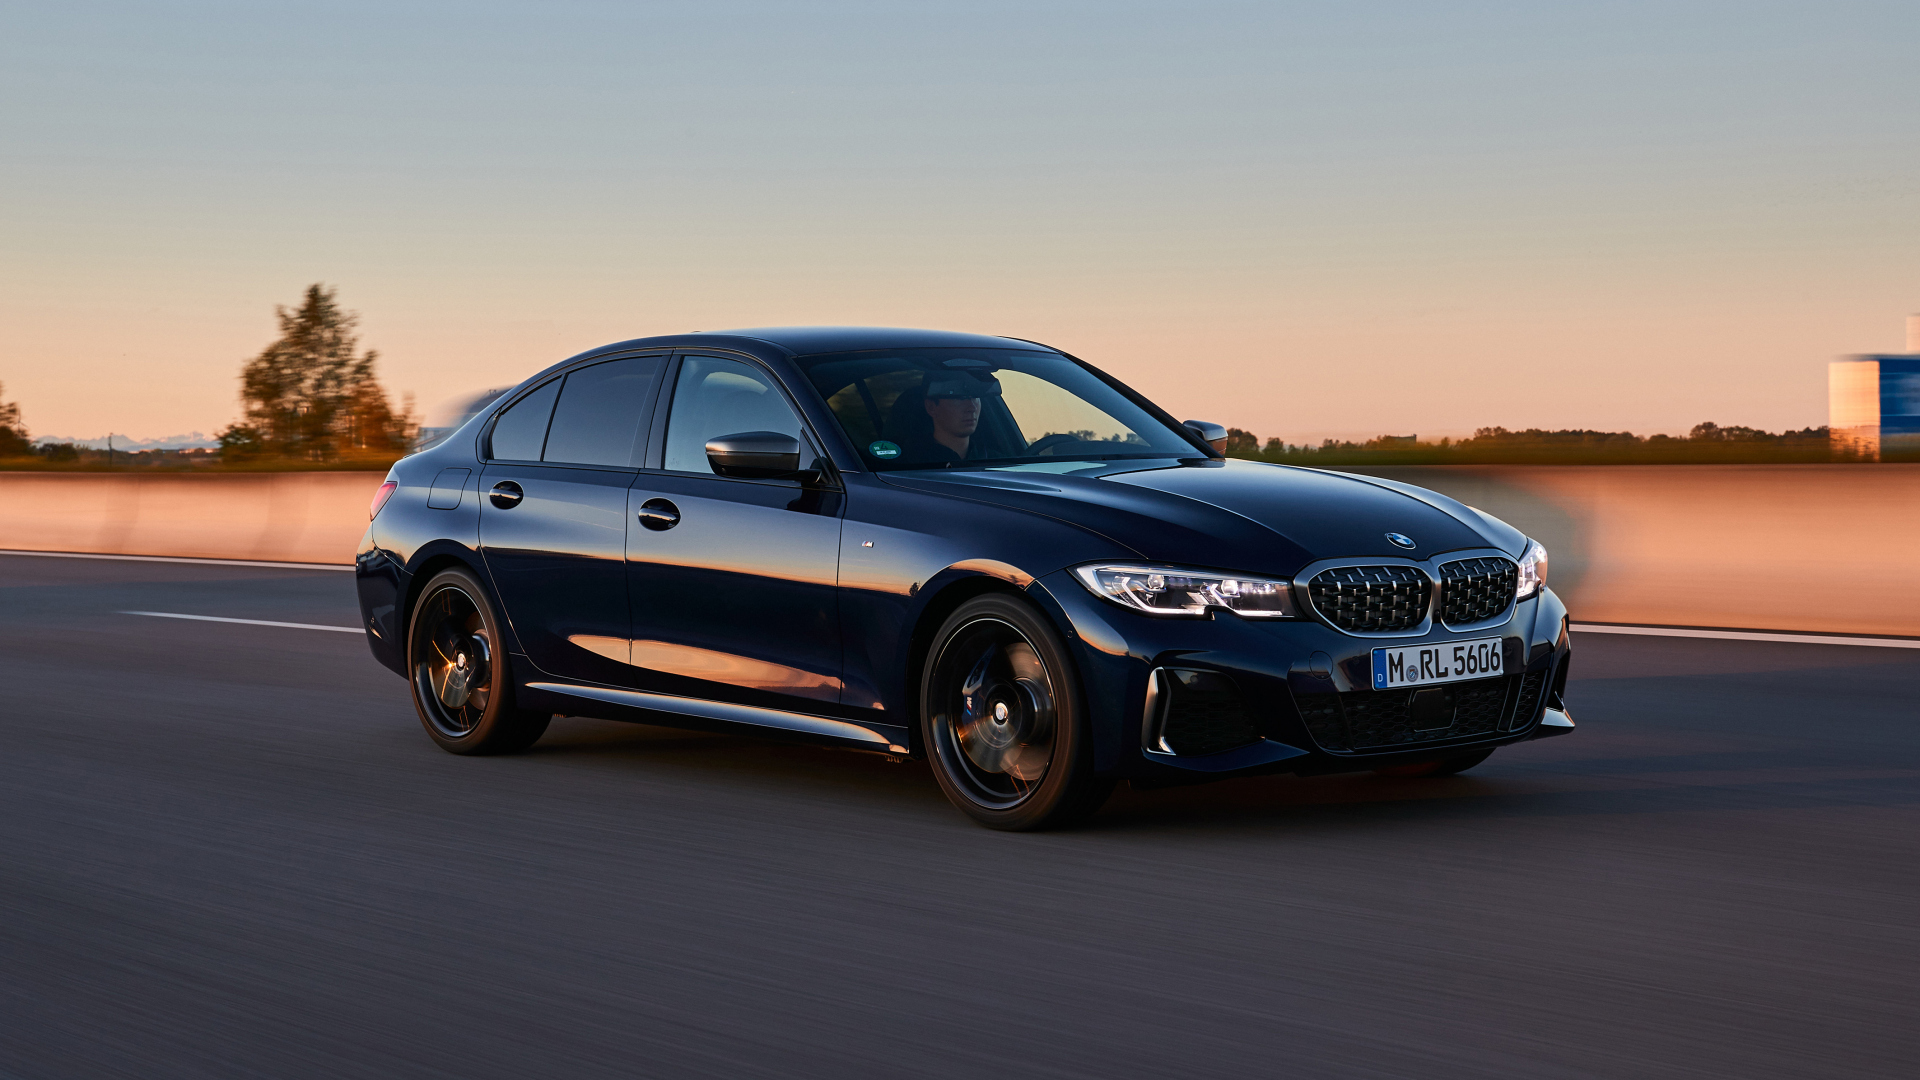 Bmw M340i Xdrive Sedan 2020 Free Desktop Wallpapers And Background Images